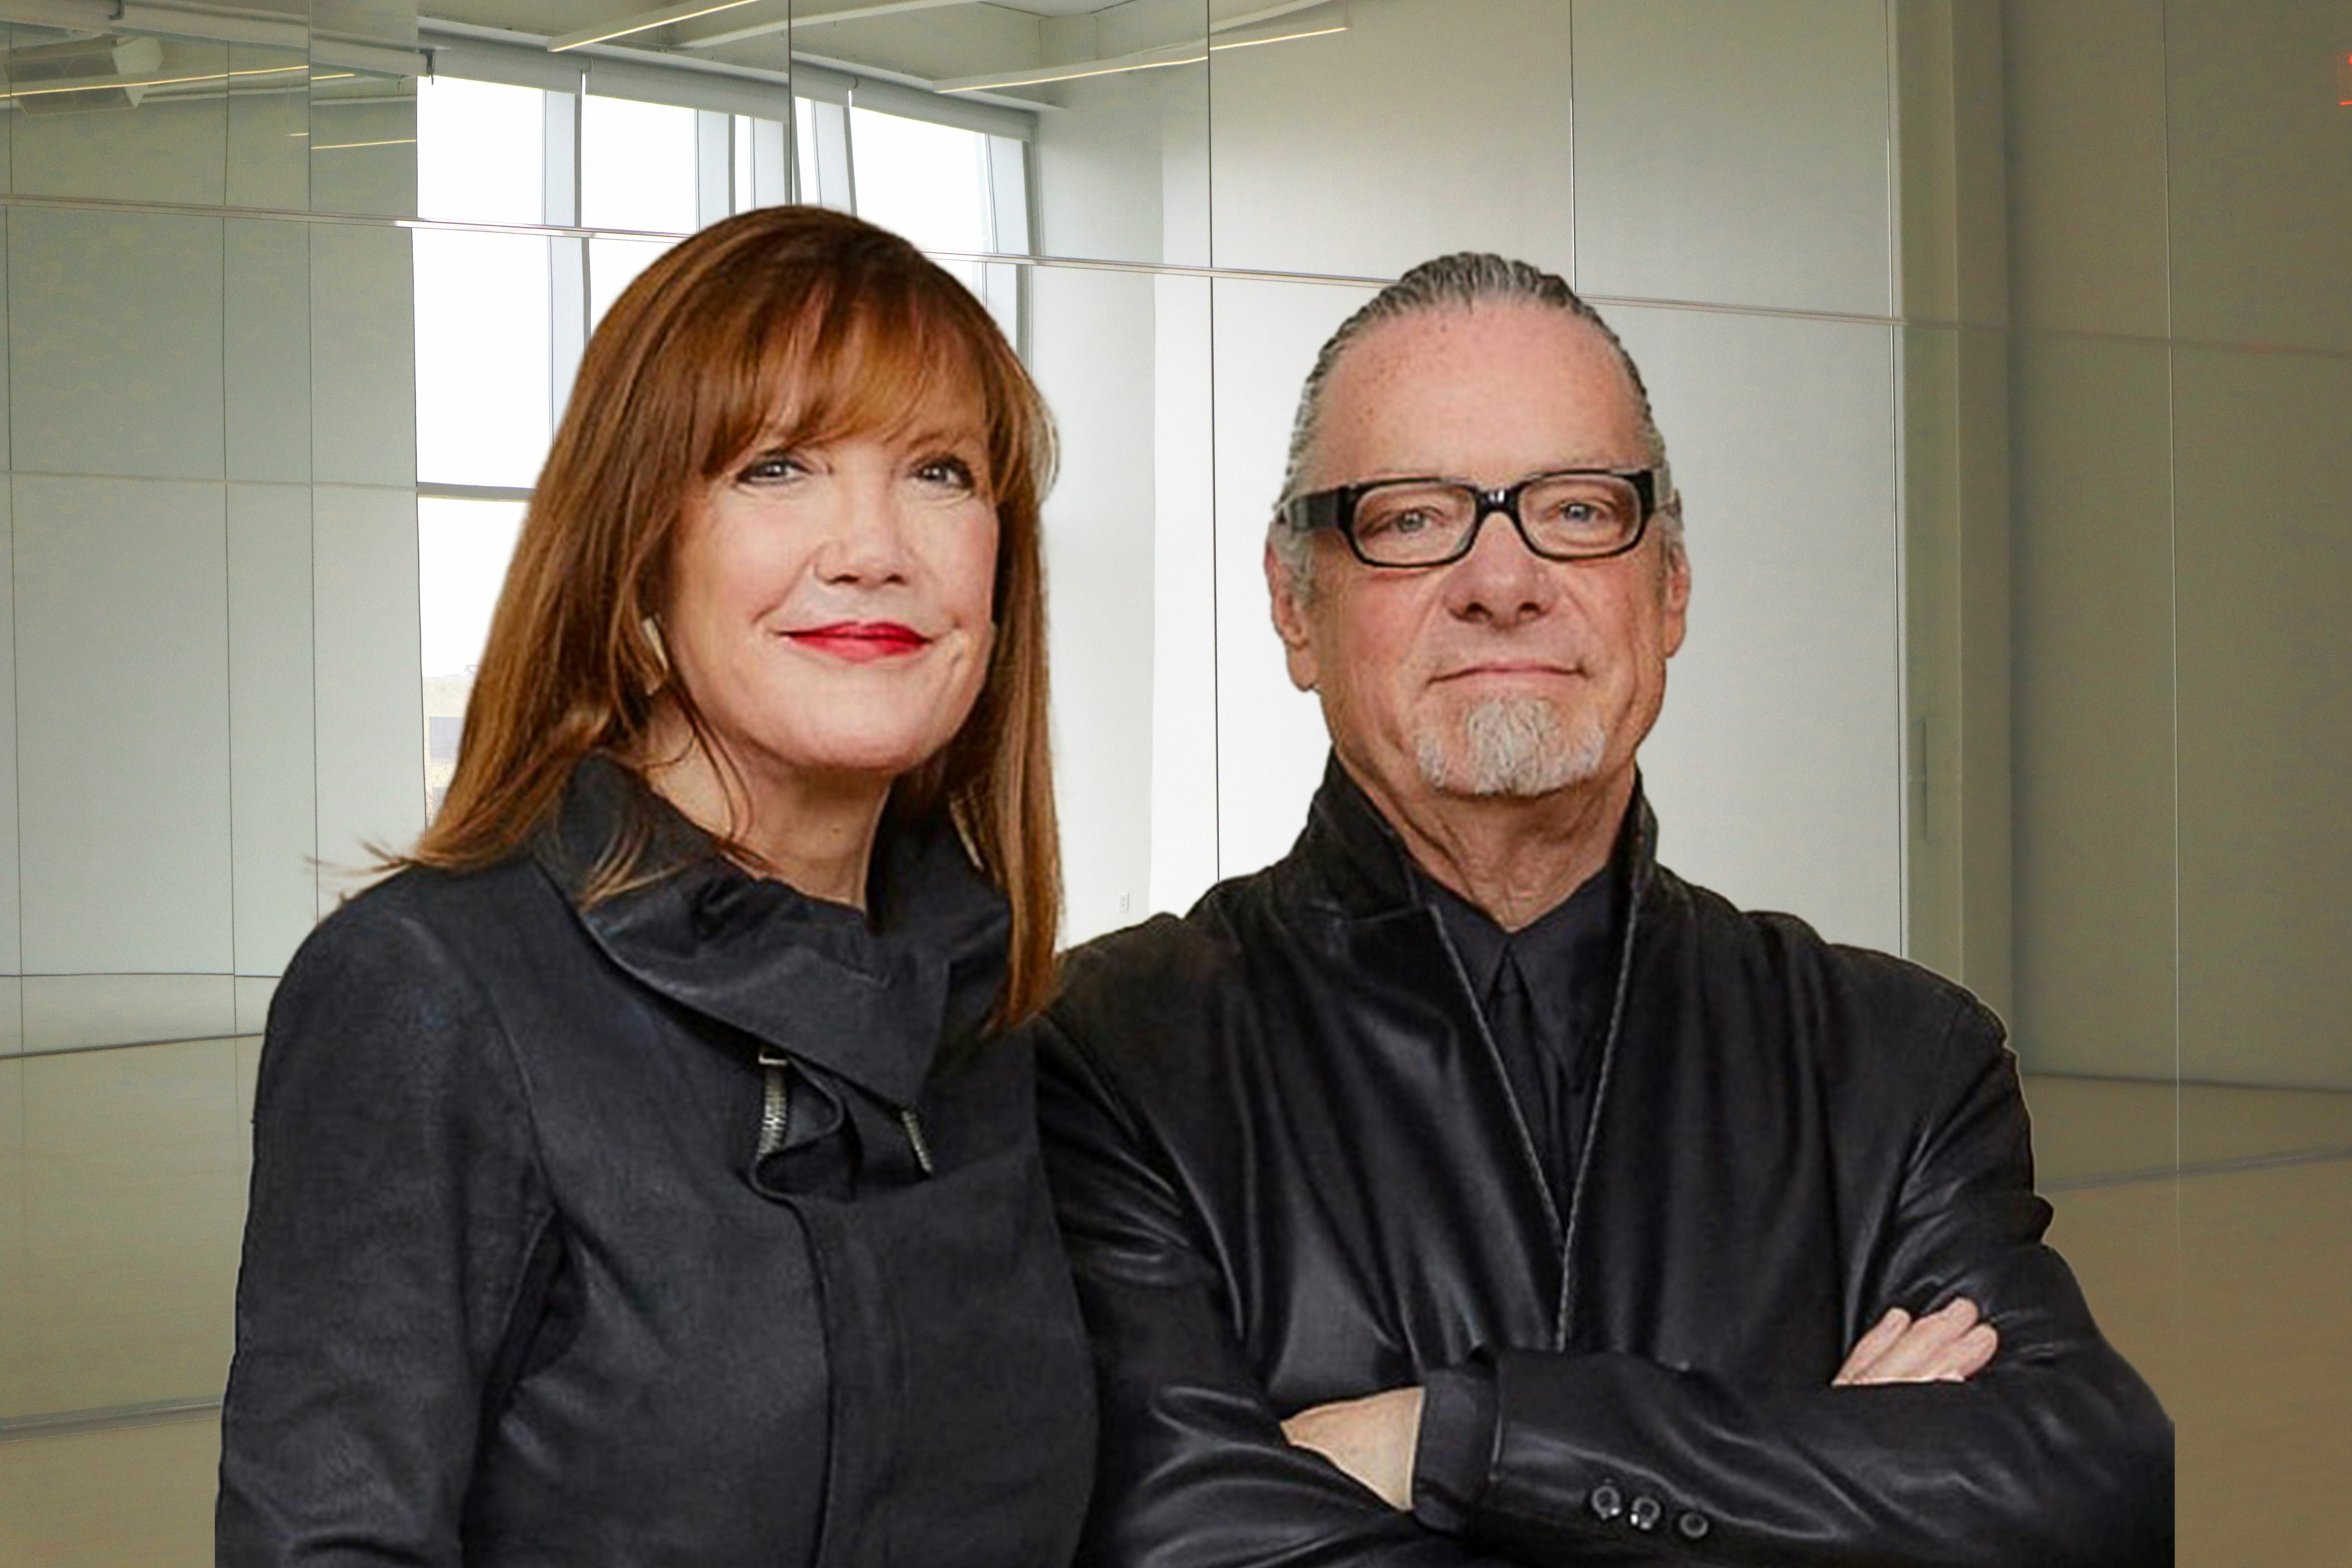 Two older white people stand in a room with mirrors. The woman on the left has red hair, wears red lipstick and is dressed in all black. The man on the right has his hair pulled back and a gray goatee, in a black jacket and wearing black framed glasses.